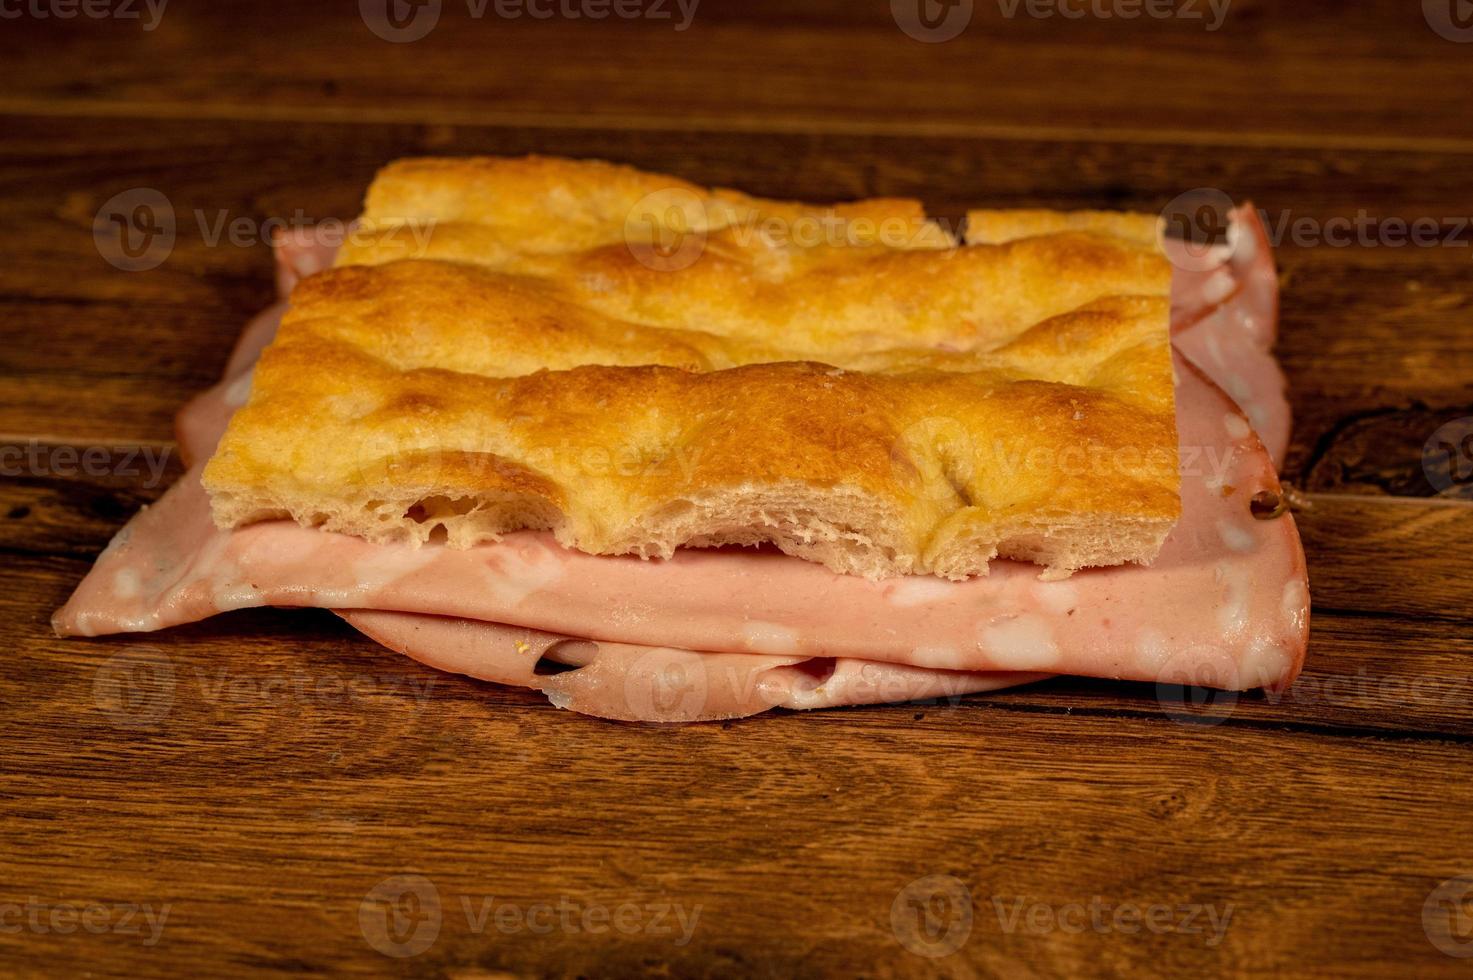 stuffed focaccia with cold cuts and vegetables photo